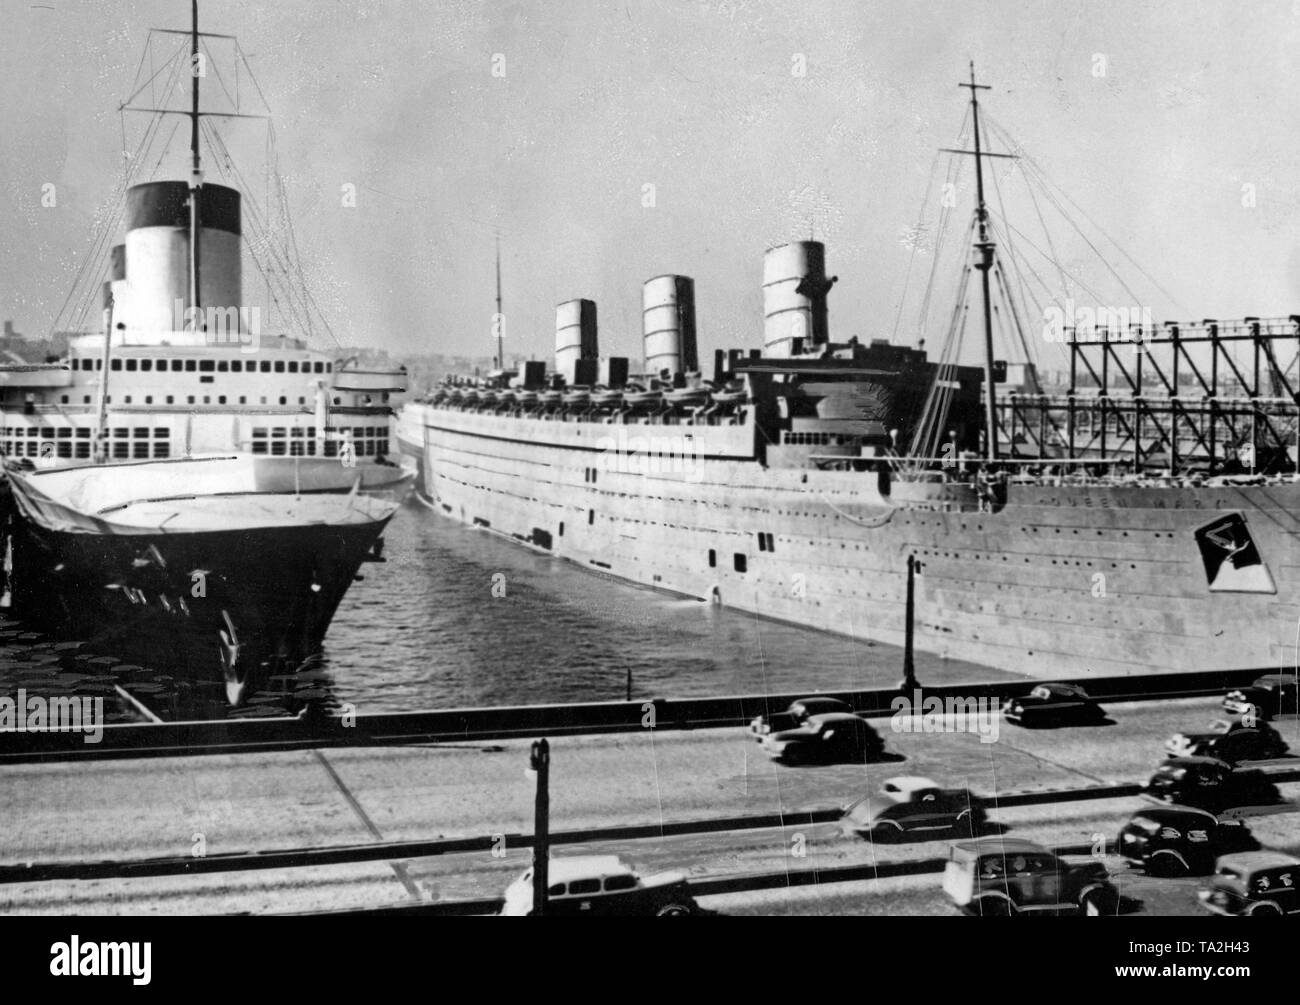 The ocean liners 'Normandie' and 'Queen Mary' during their laytime in the harbor of New York. Stock Photo